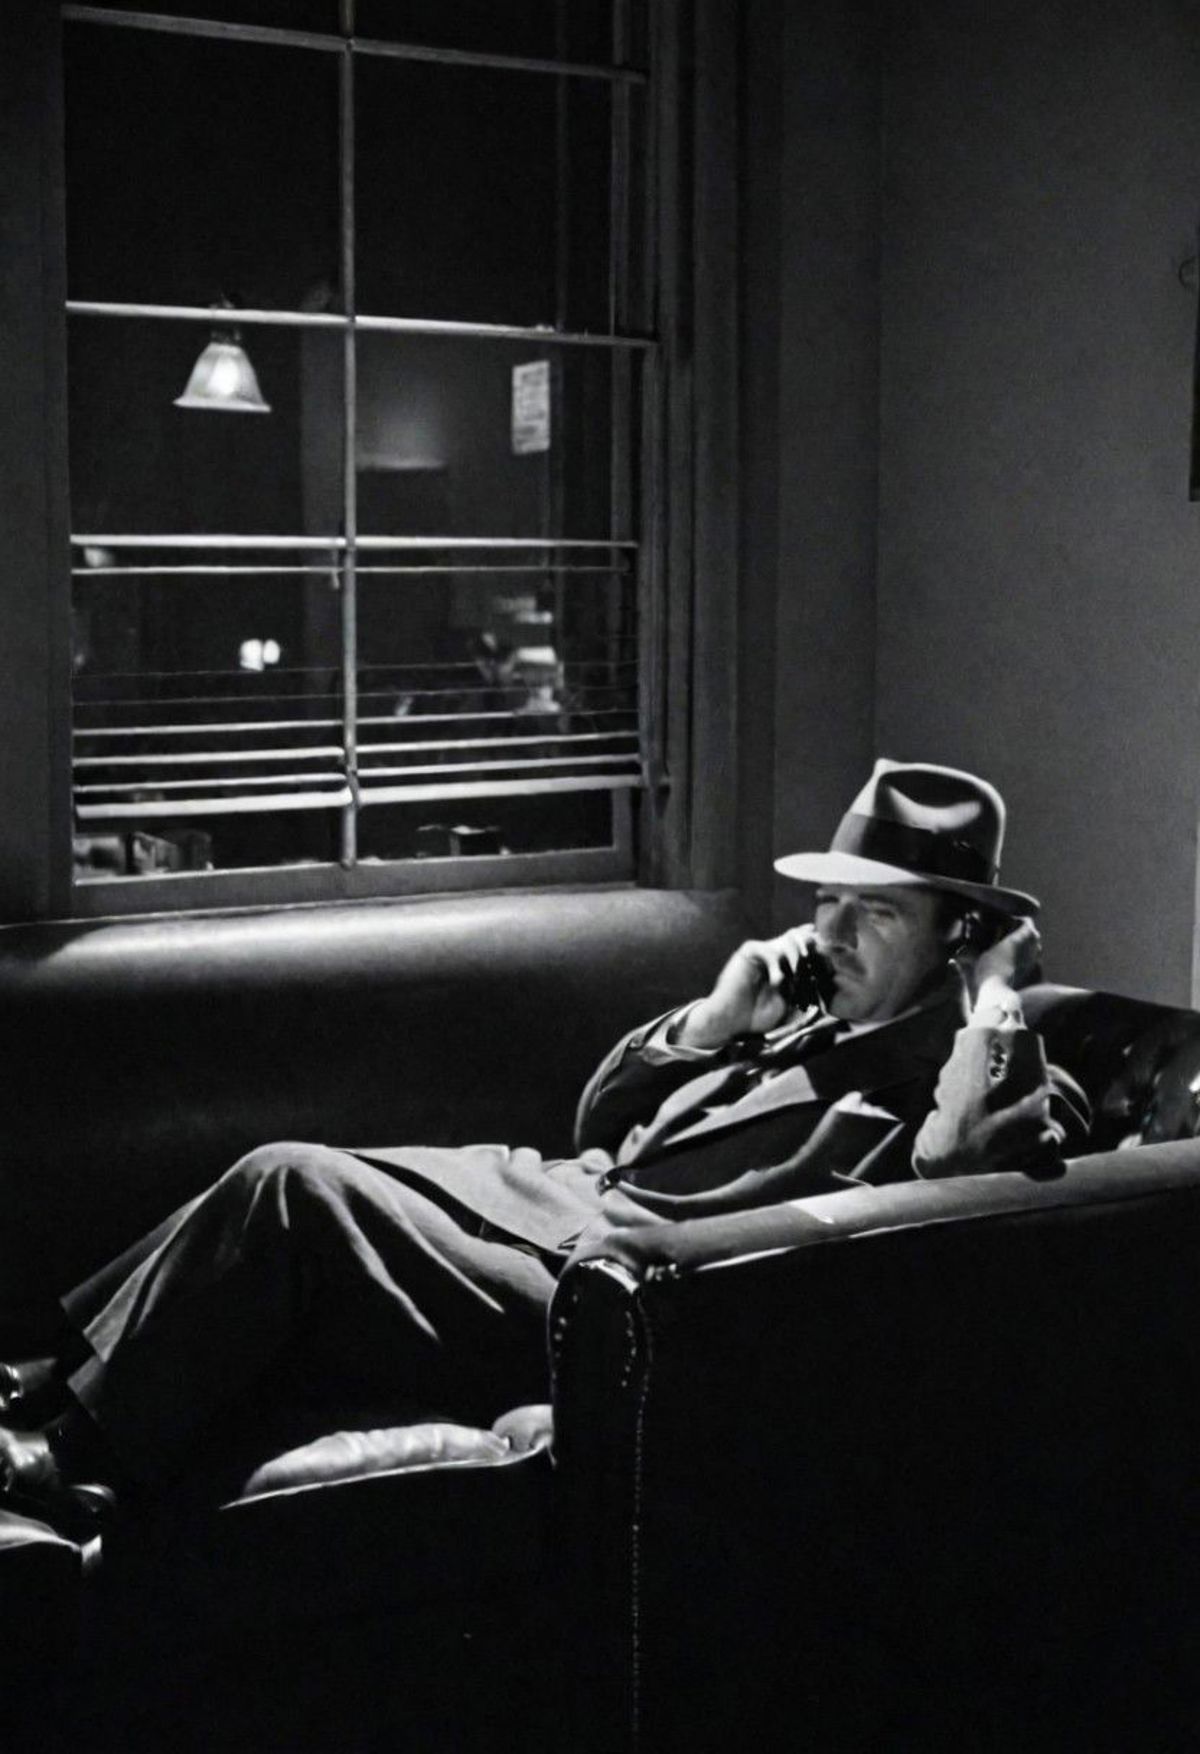 Man in a suit and hat sitting on a couch talking on his cell phone.